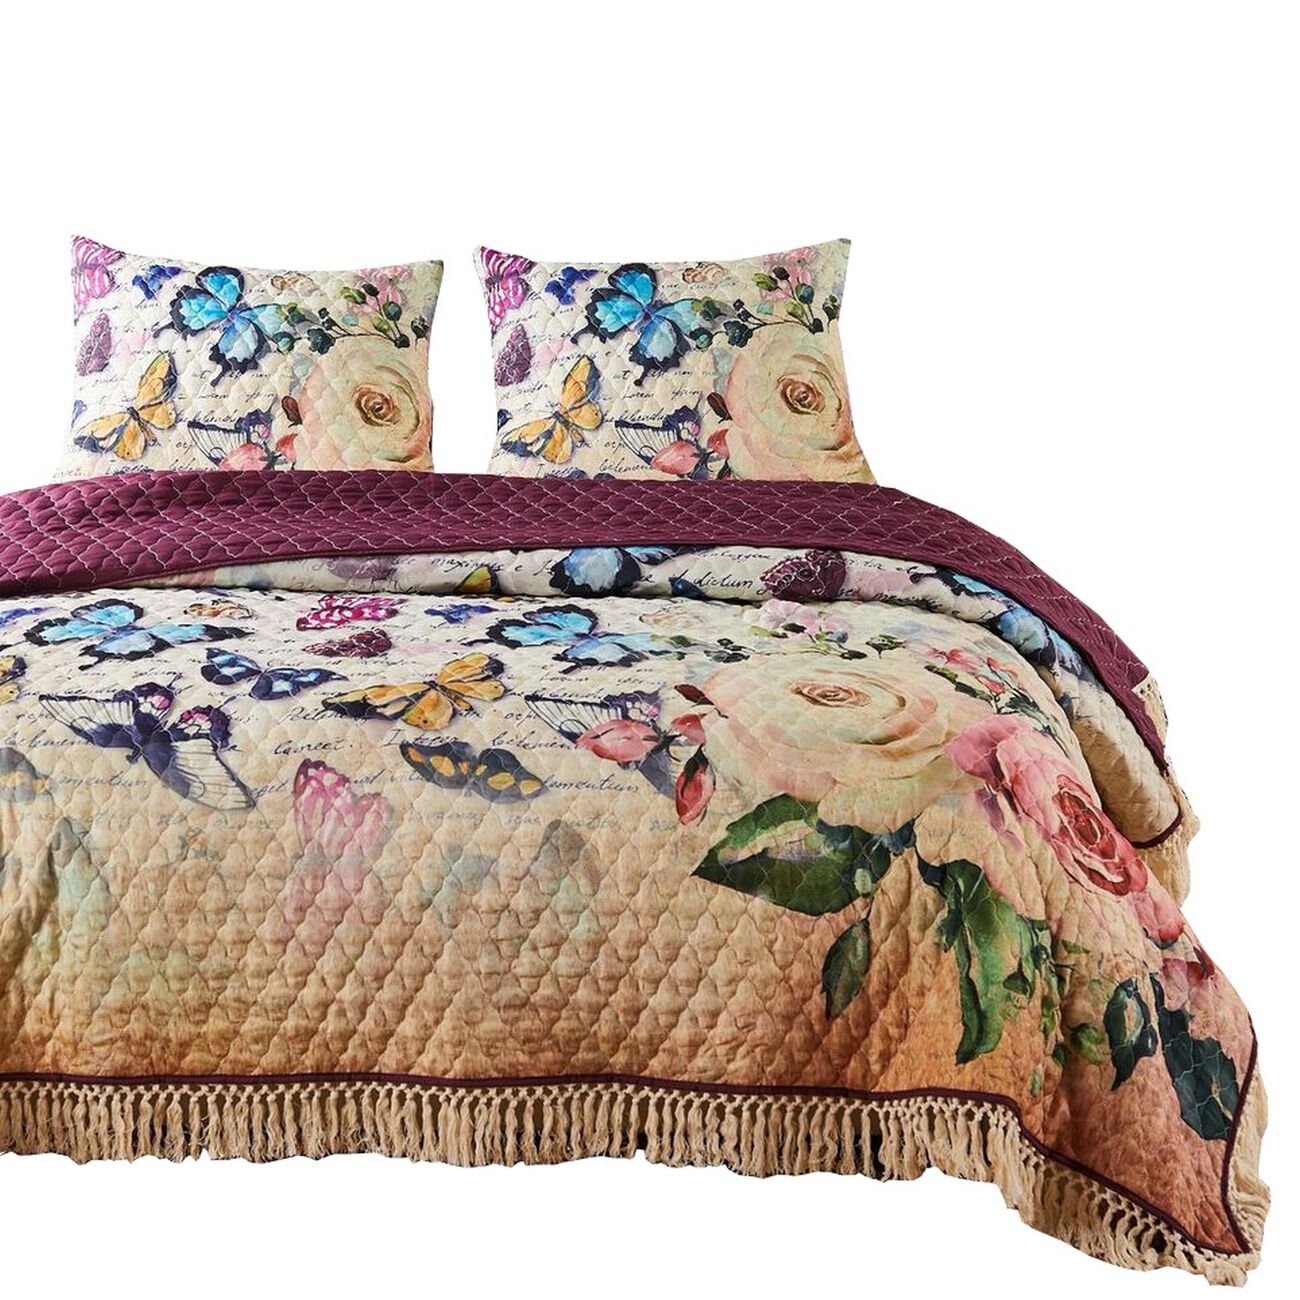 Barrow 3 Piece Butterfly Printed Full Quilt Set, Multicolor